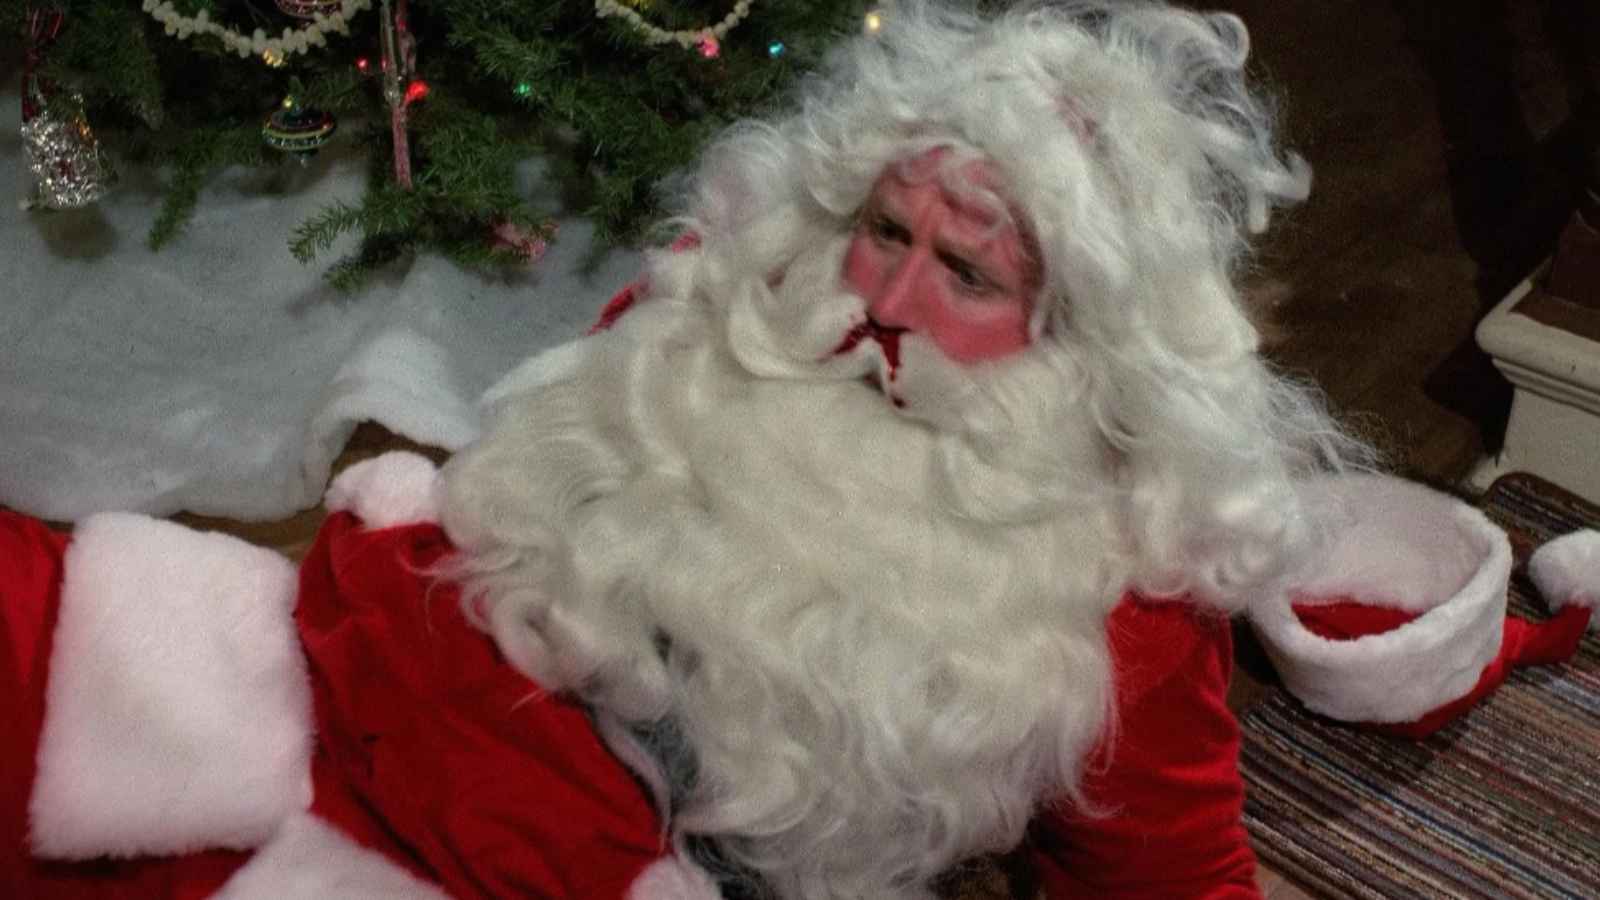 The Top 15 Scariest Christmas Movies to Spice Up Your Season